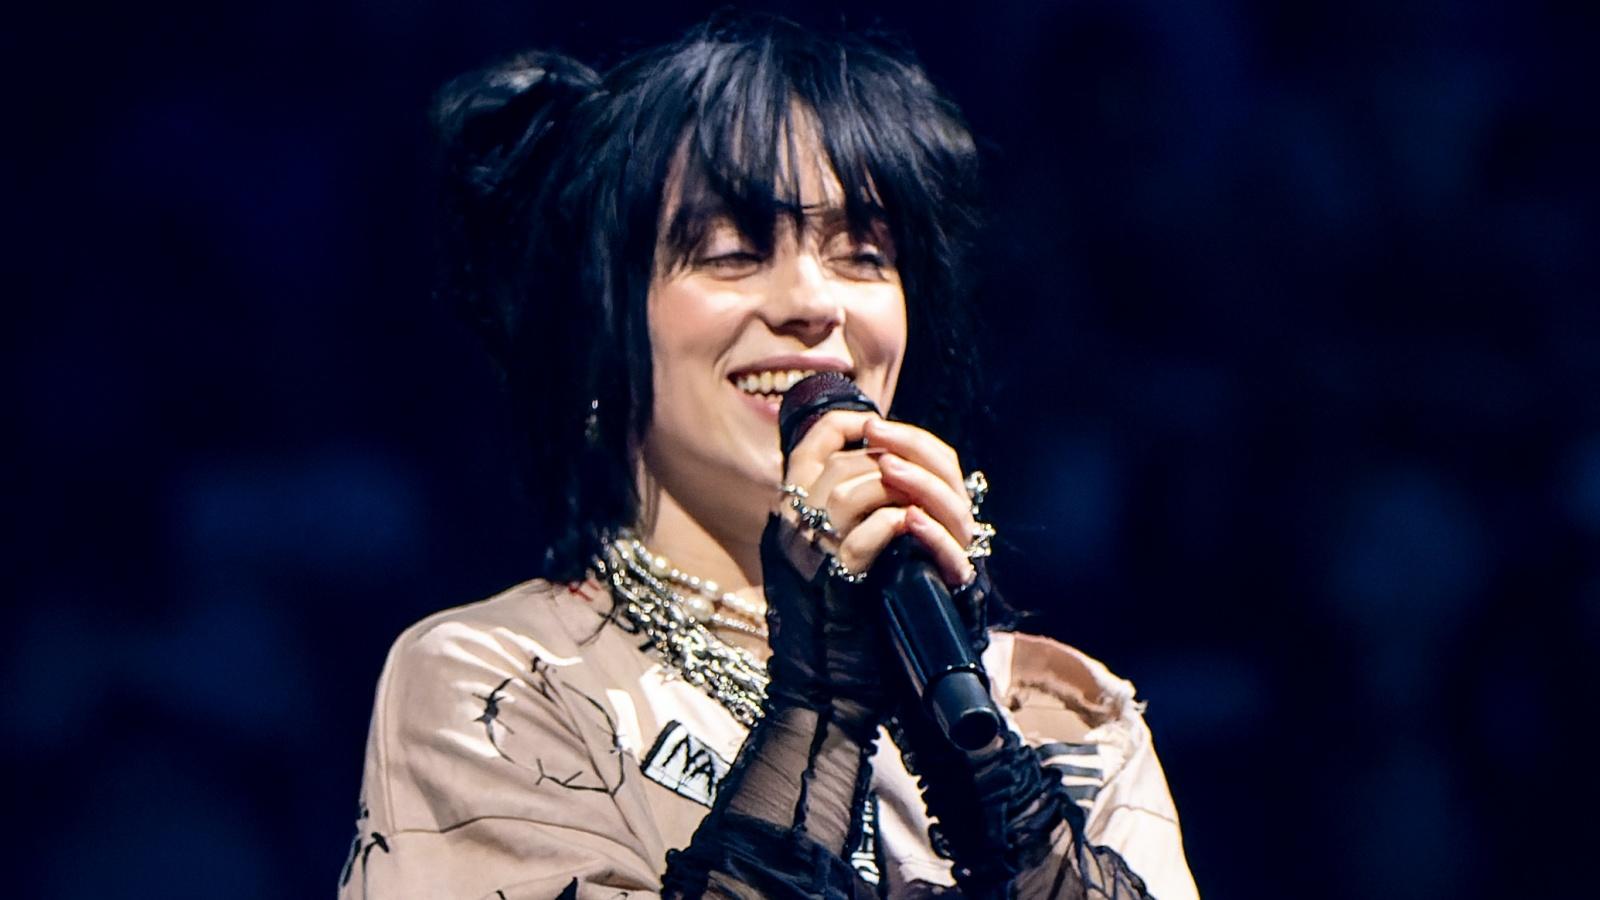 Billie Eilish smiling and holding a microphone onstage